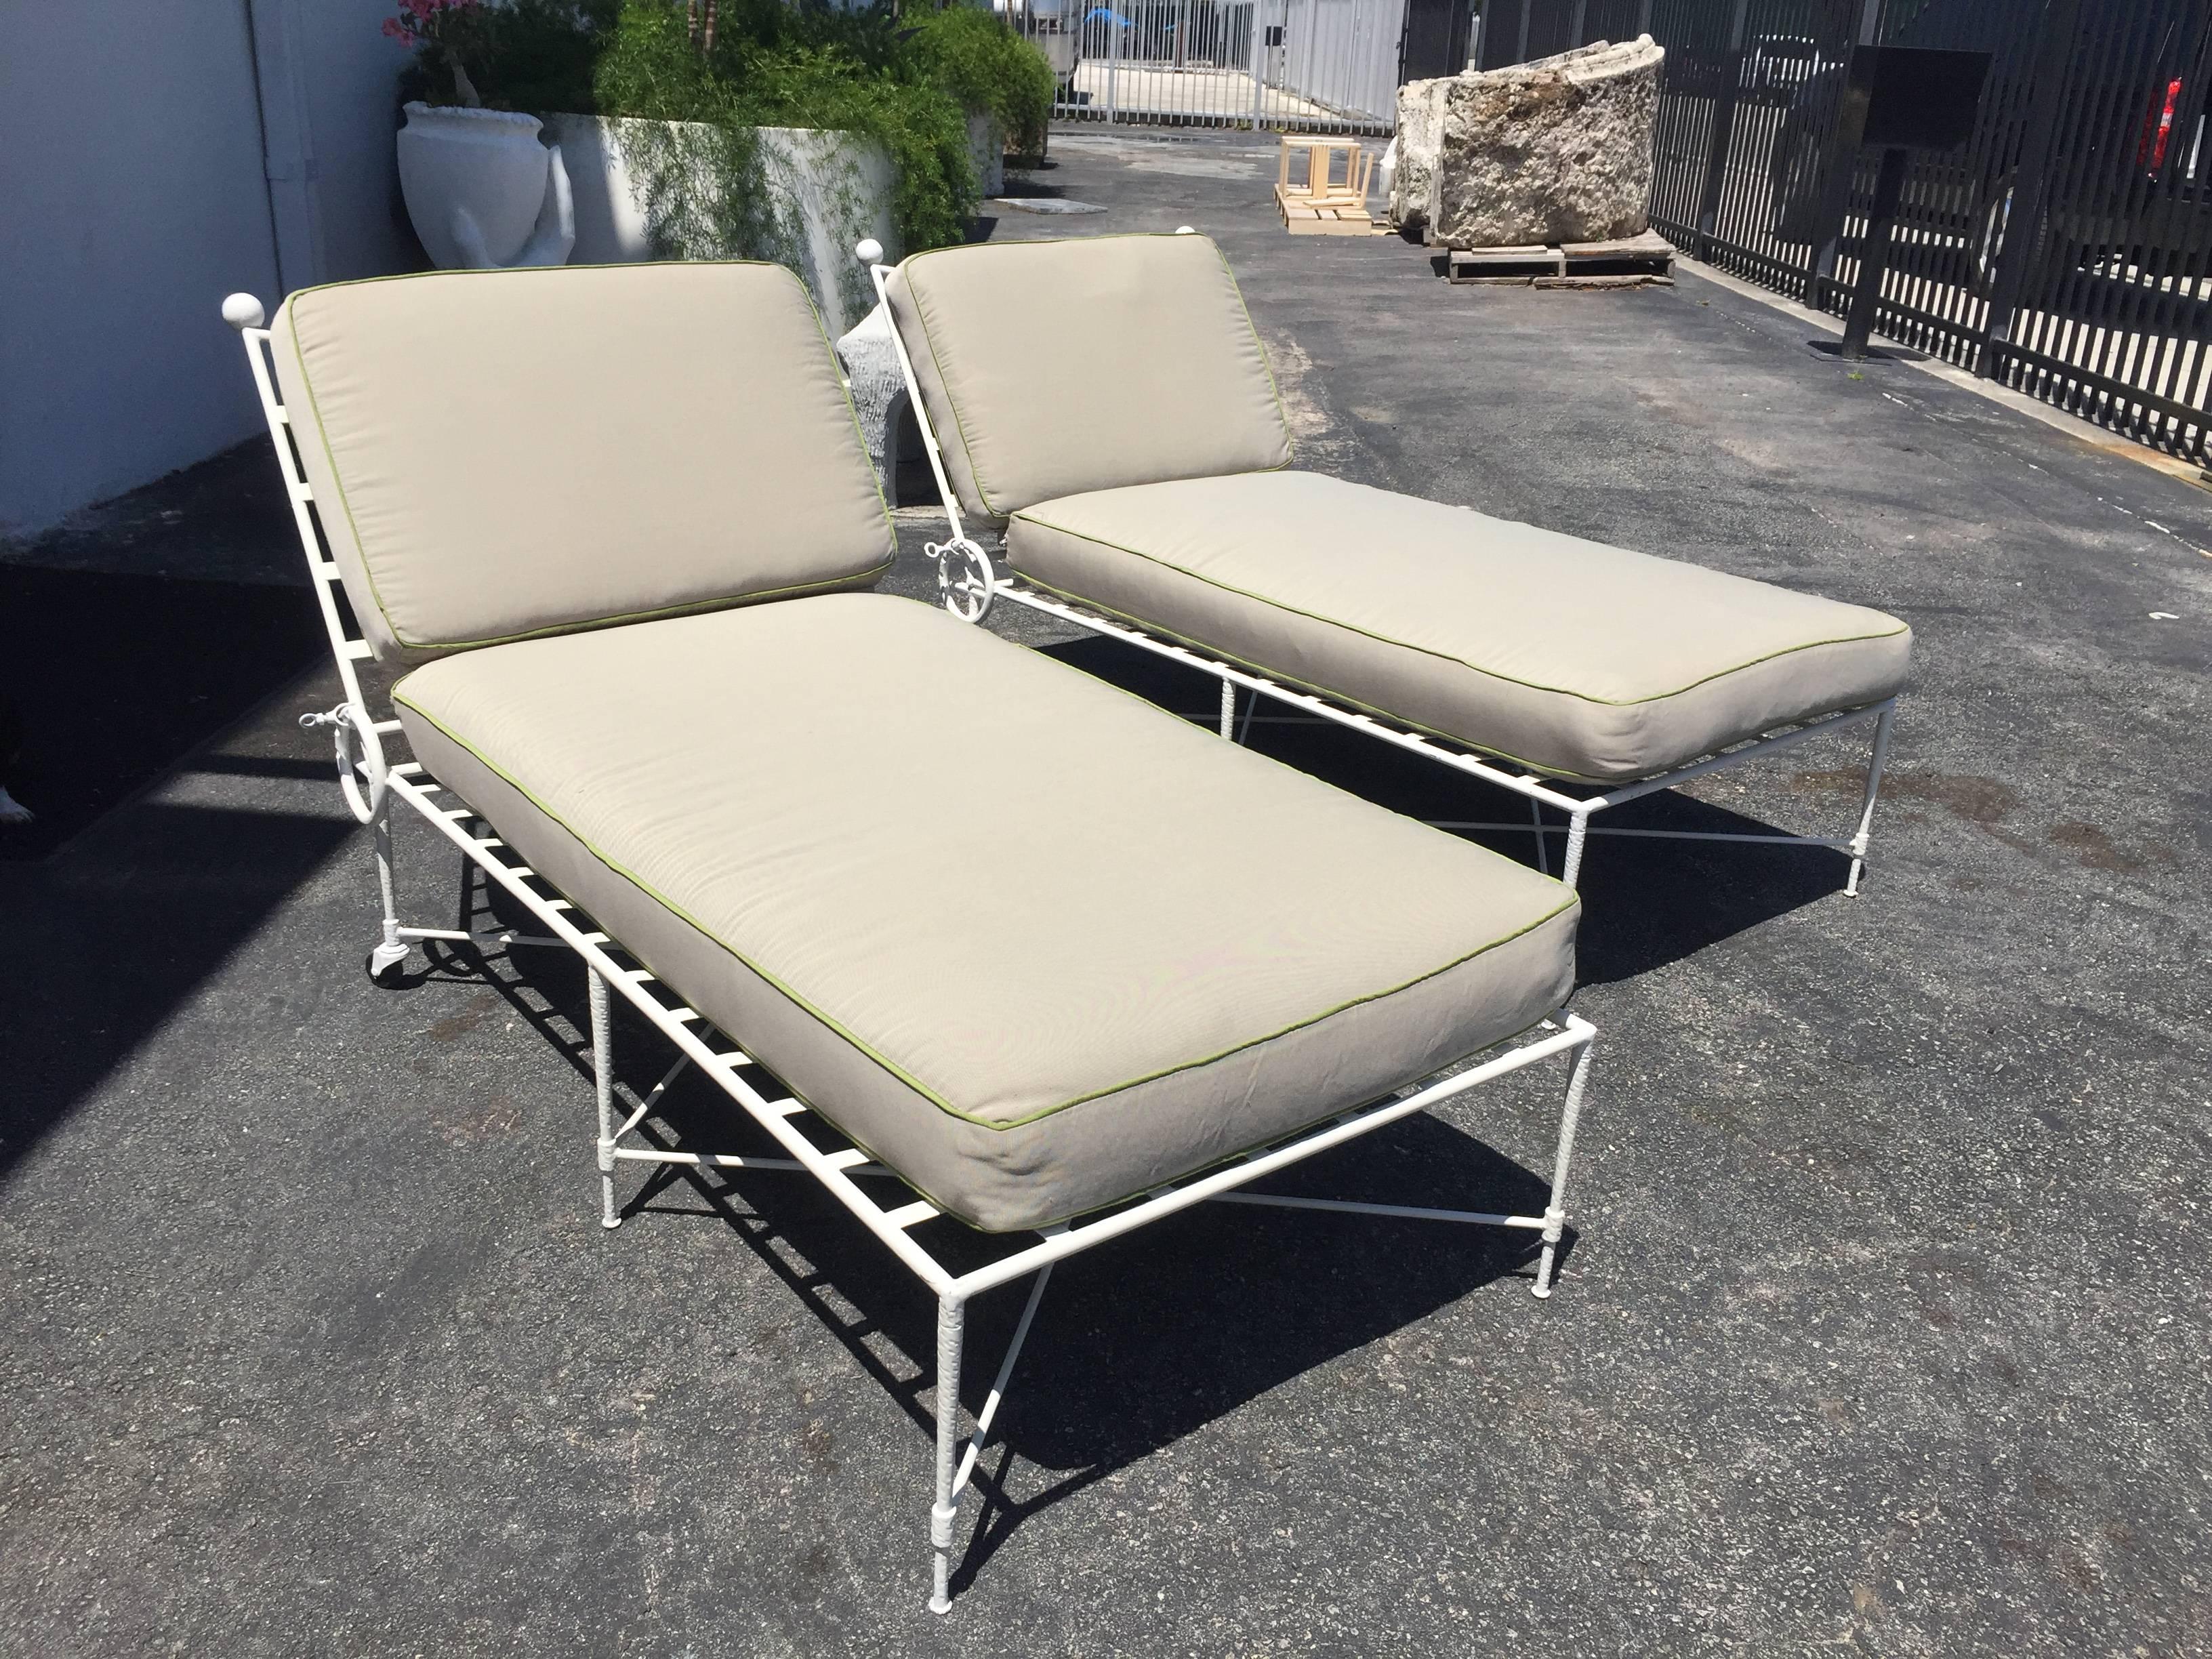 Original reclining chaise longues by Mario Papperzini for John Salterini. Original white painted iron is in excellent condition. Adjustable back reclines from a full 90 degrees upright position to four lower settings to full flat. Cushions shown are